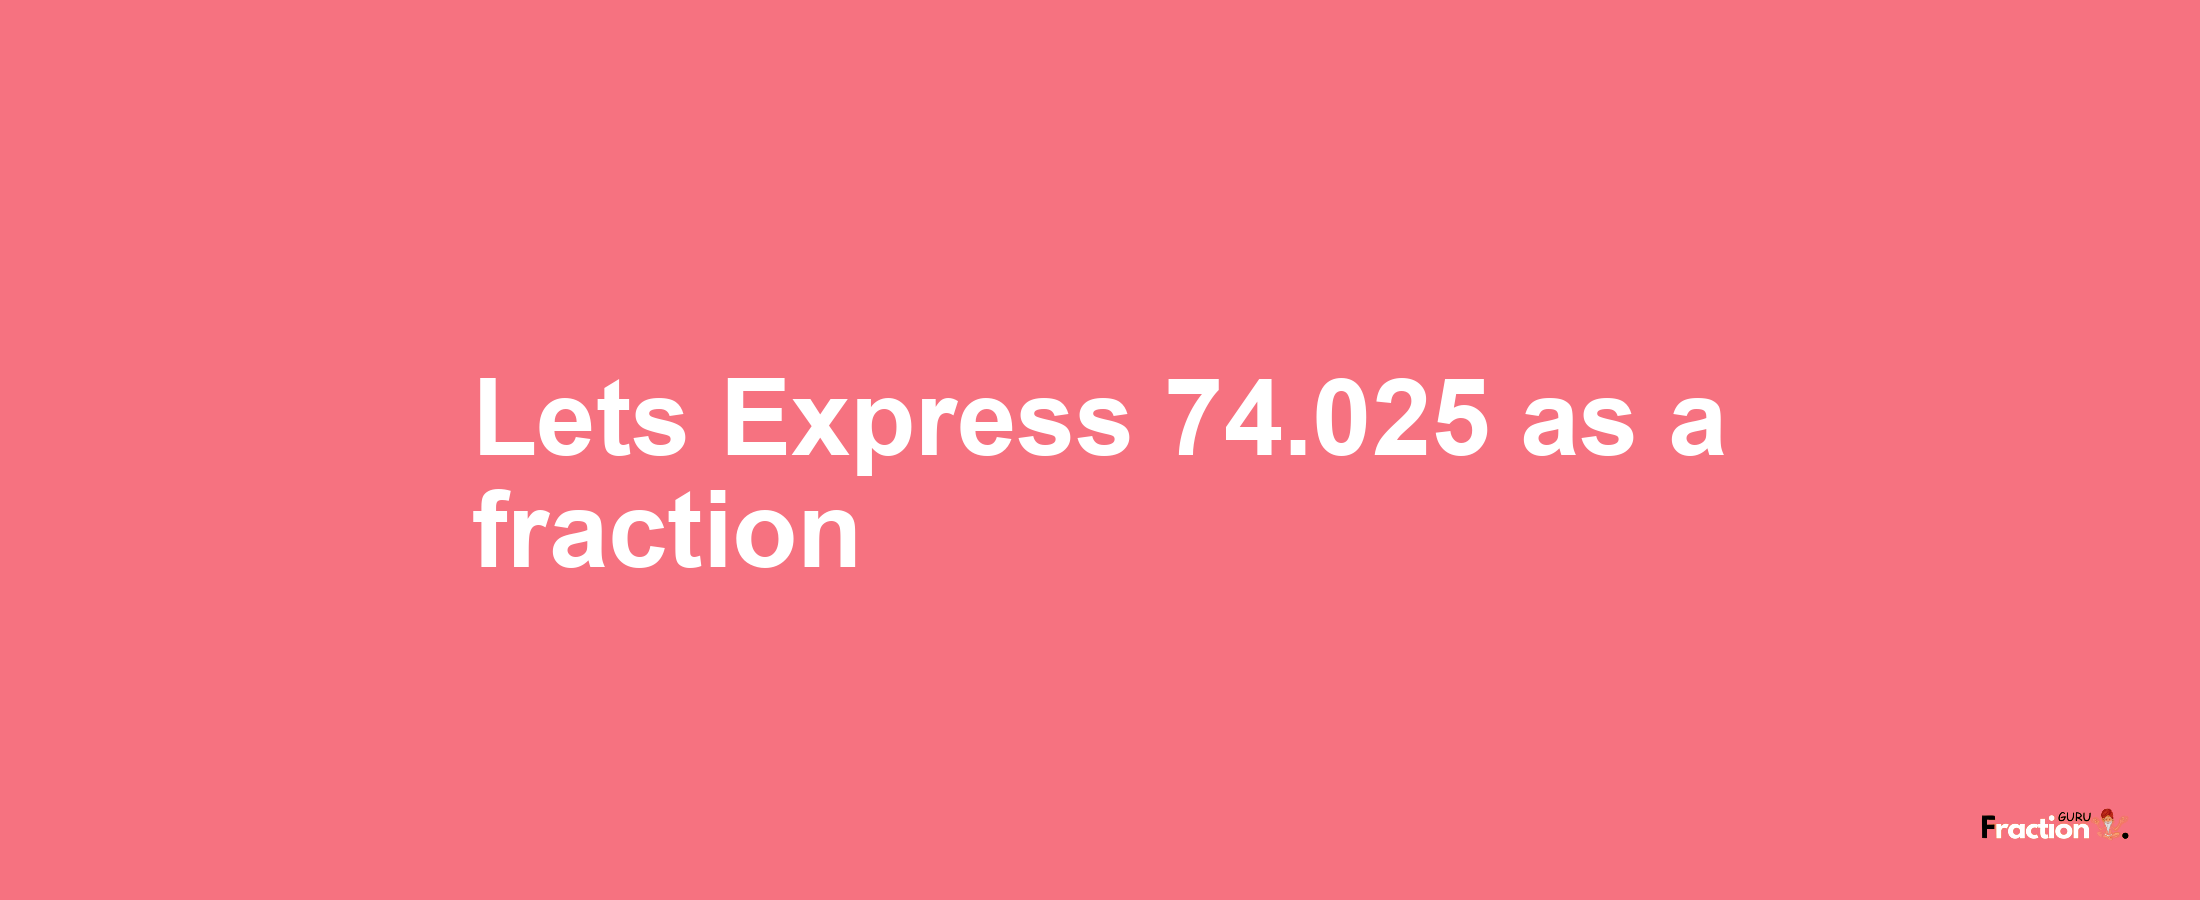 Lets Express 74.025 as afraction